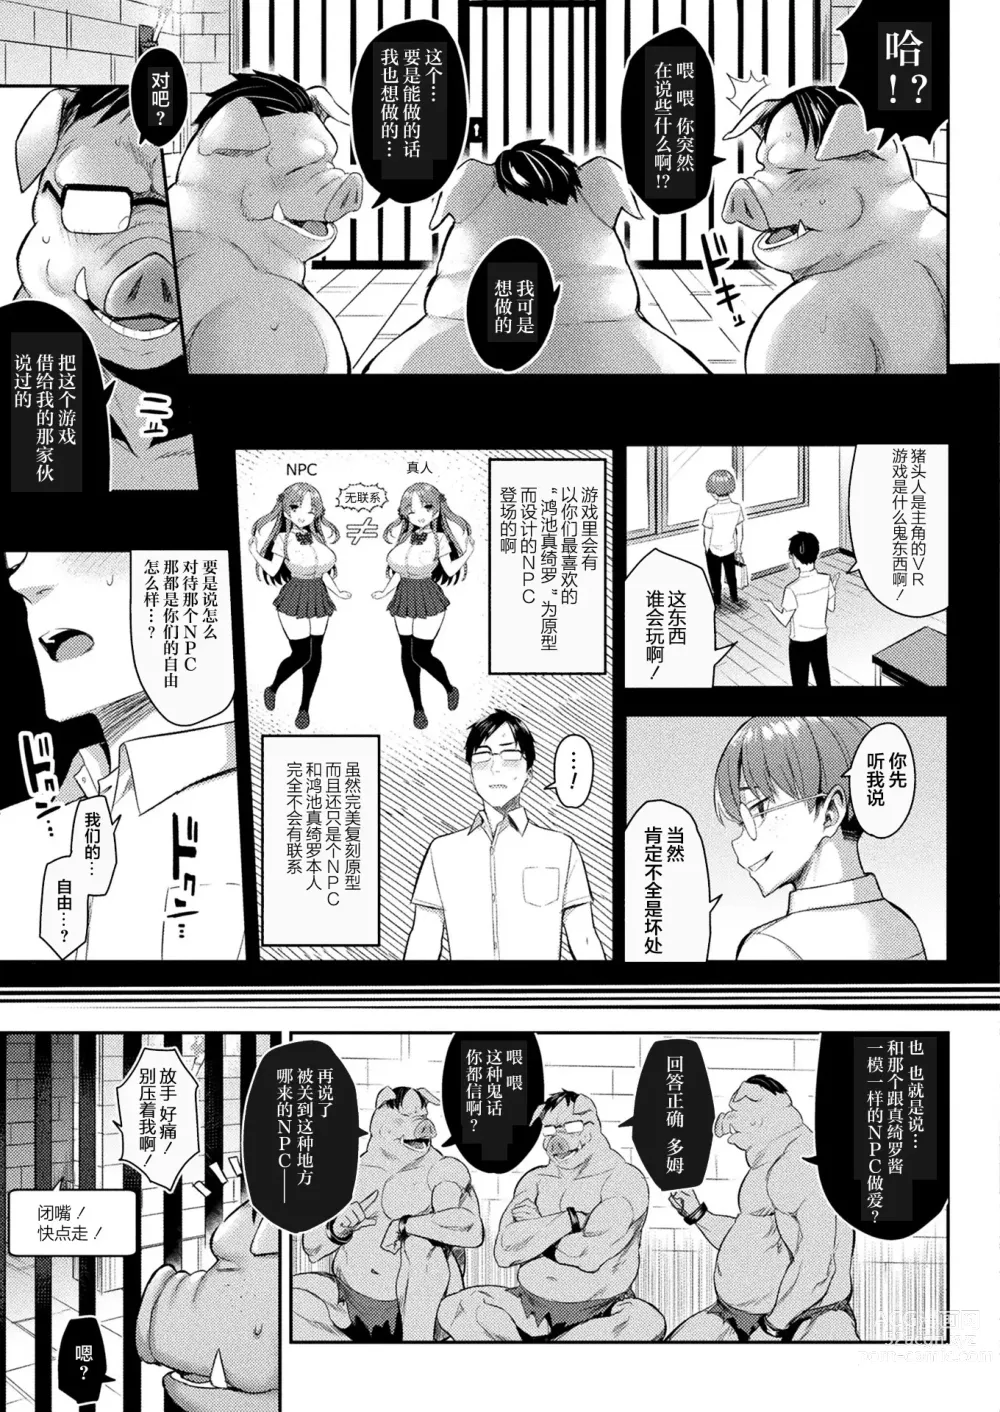 Page 4 of manga In Moral Gamemaster Ch. 3 Kouhen